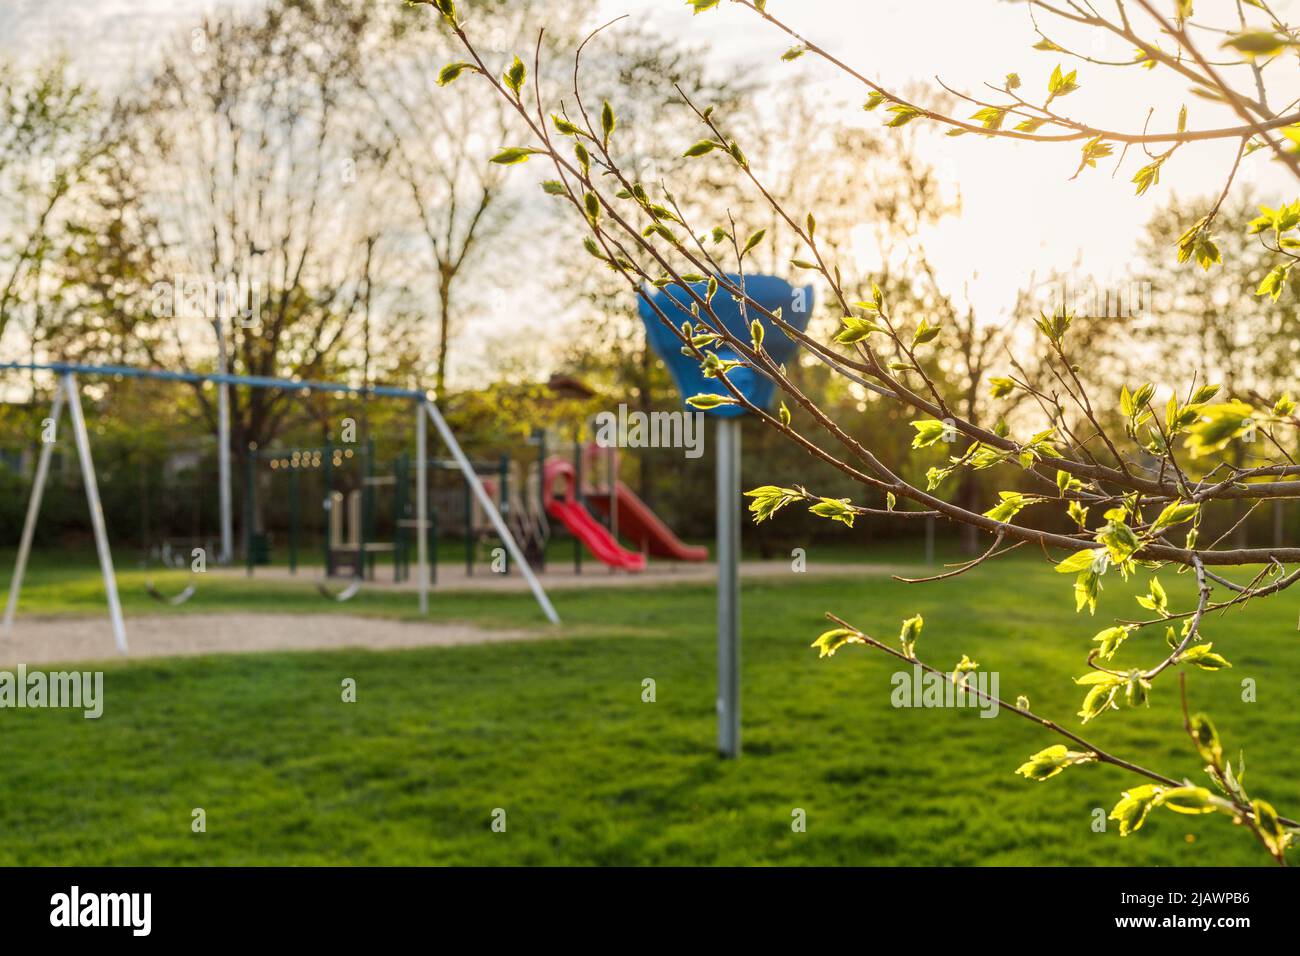 Playground in the local public park on a sunny spring day with green grass and trees. Stock Photo